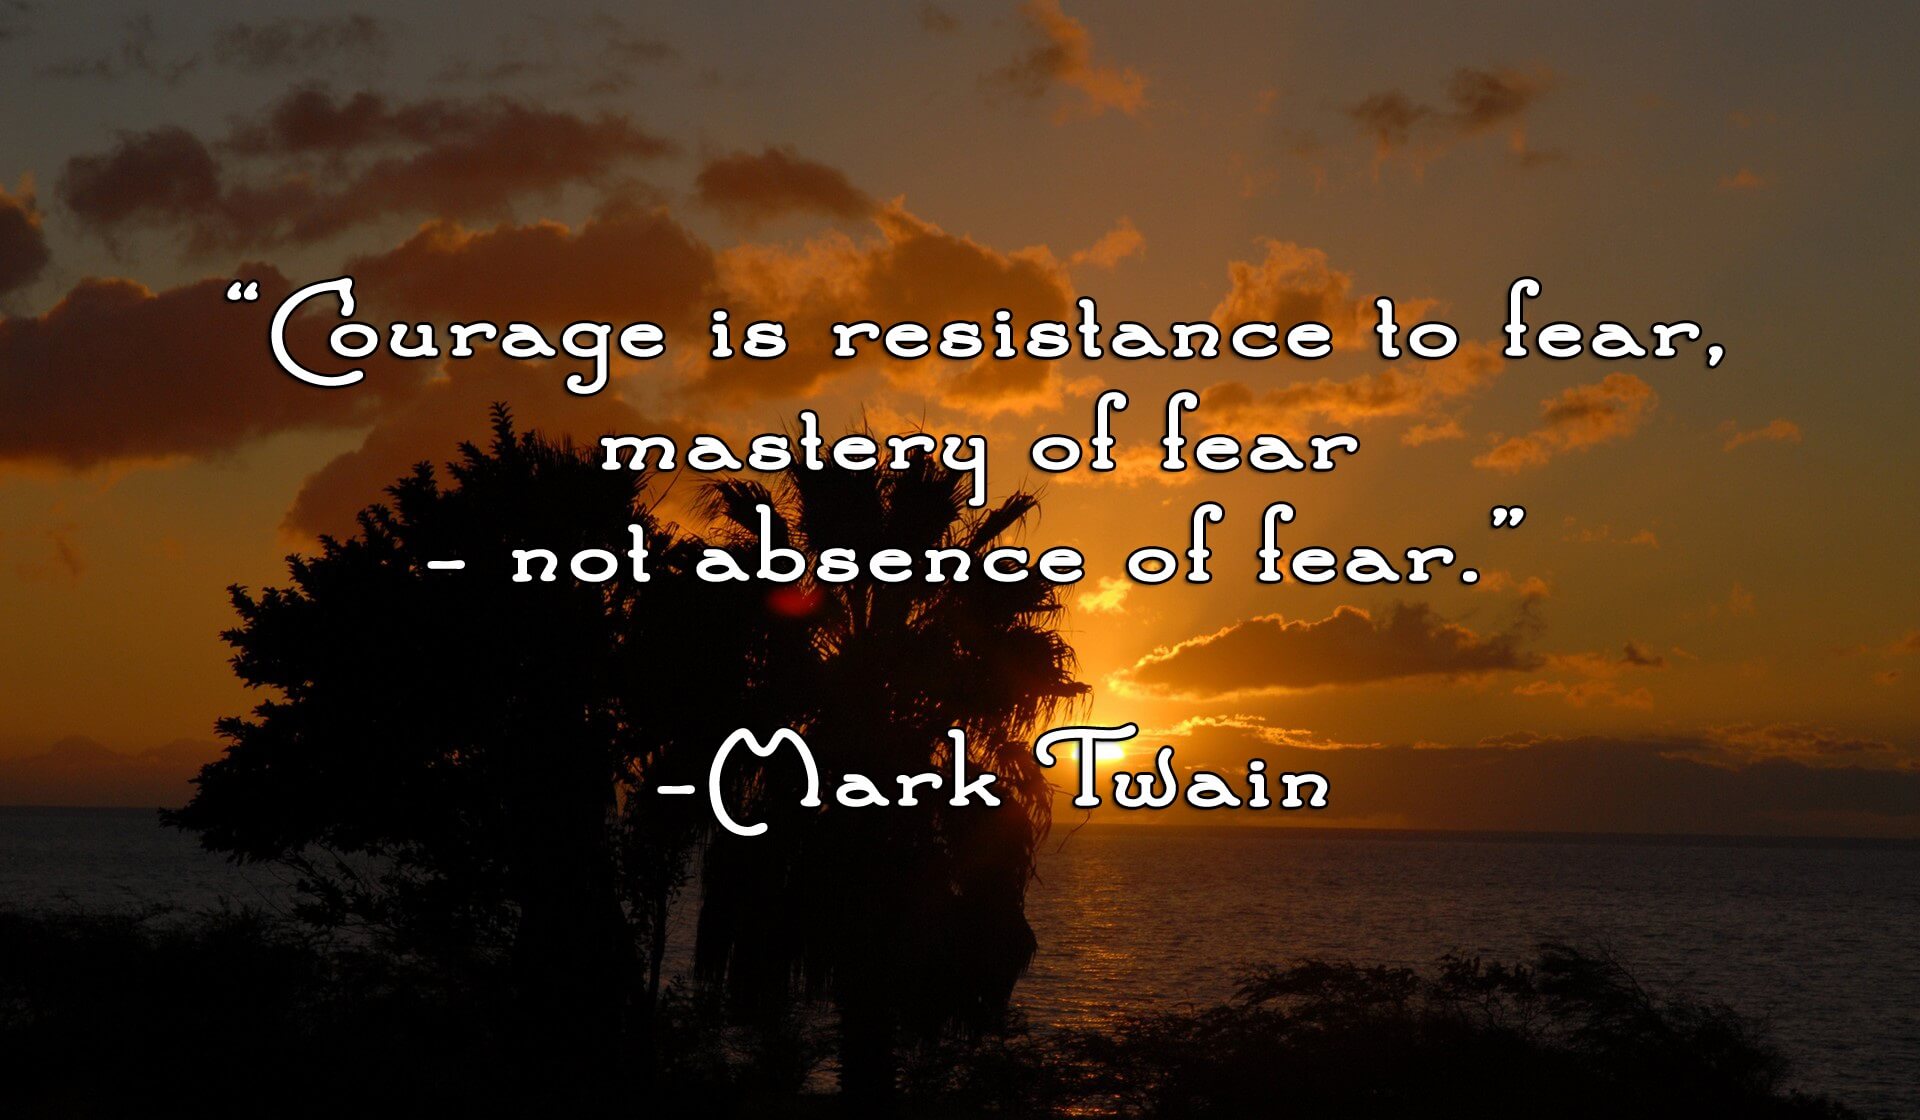 Courage is resistance to fear